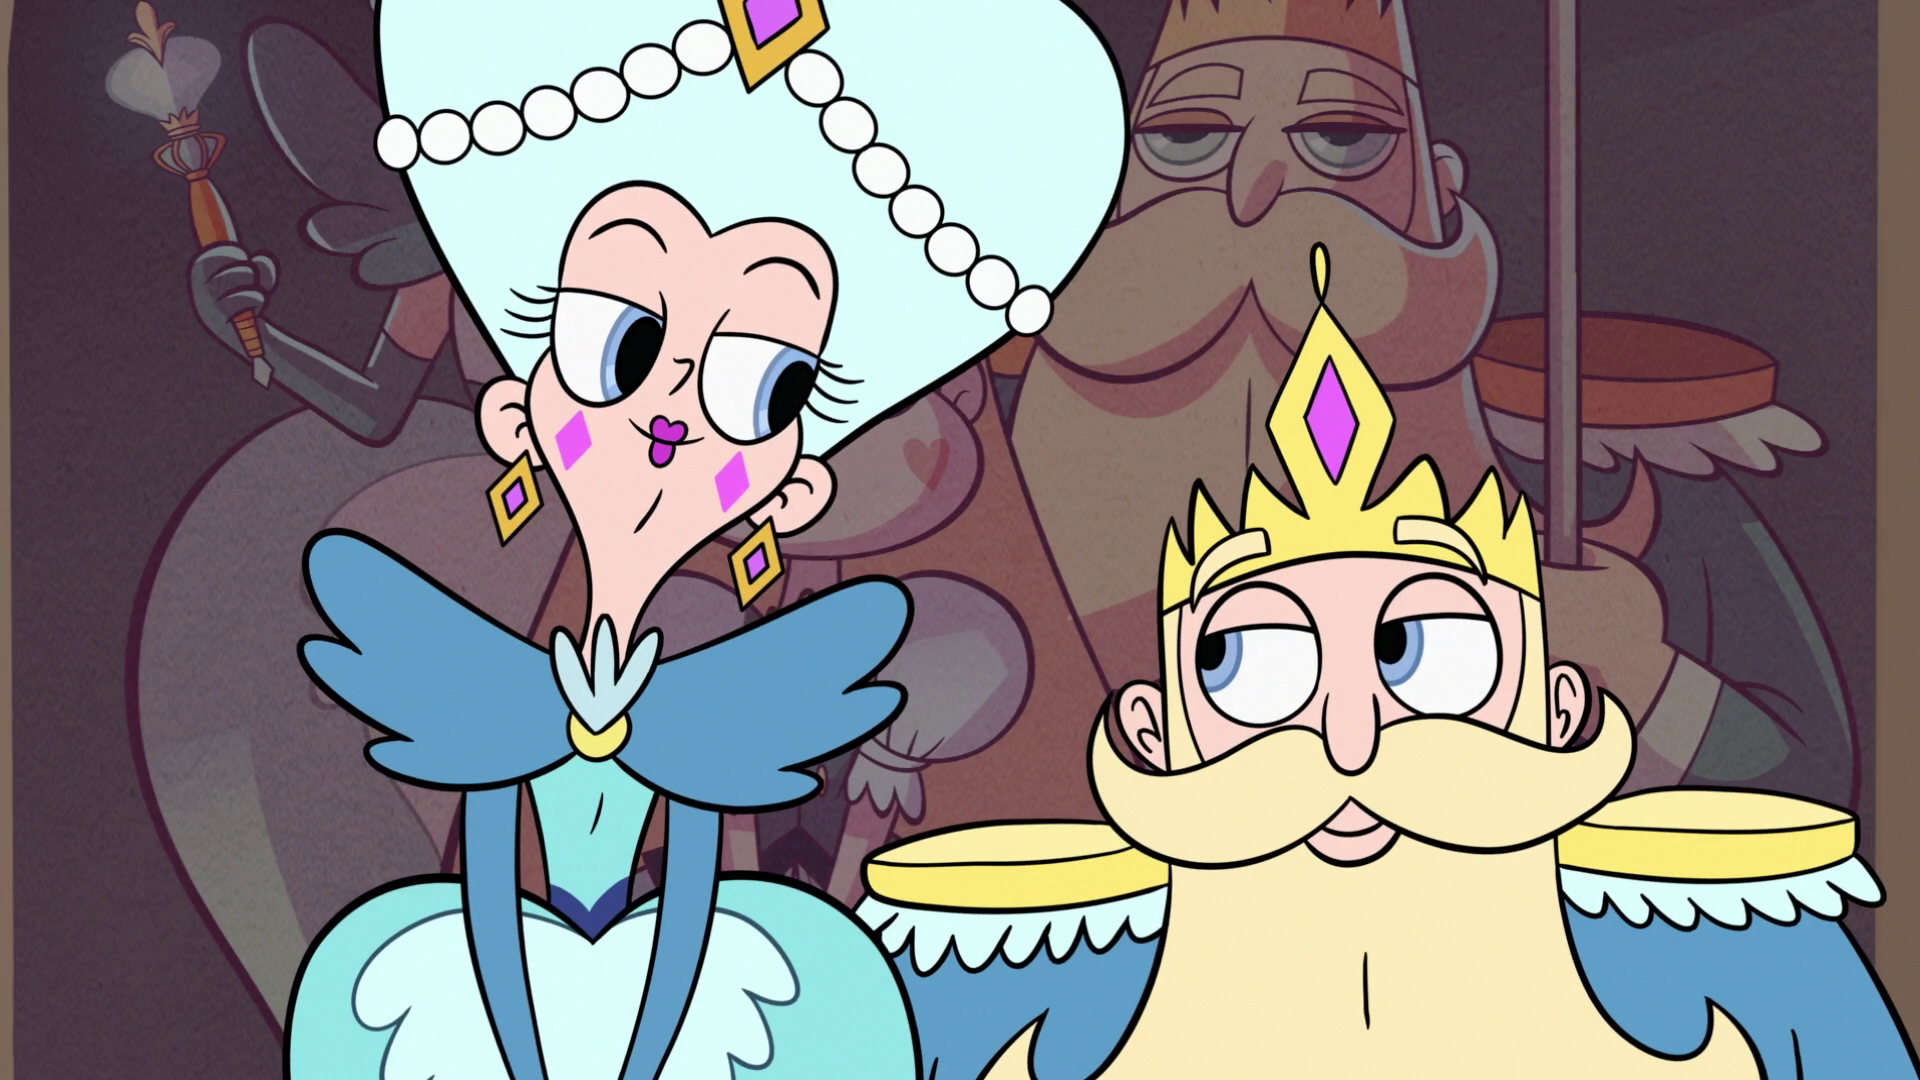 5. The Kingdom is just Mewni on Star Vs. The Forces of Evil.